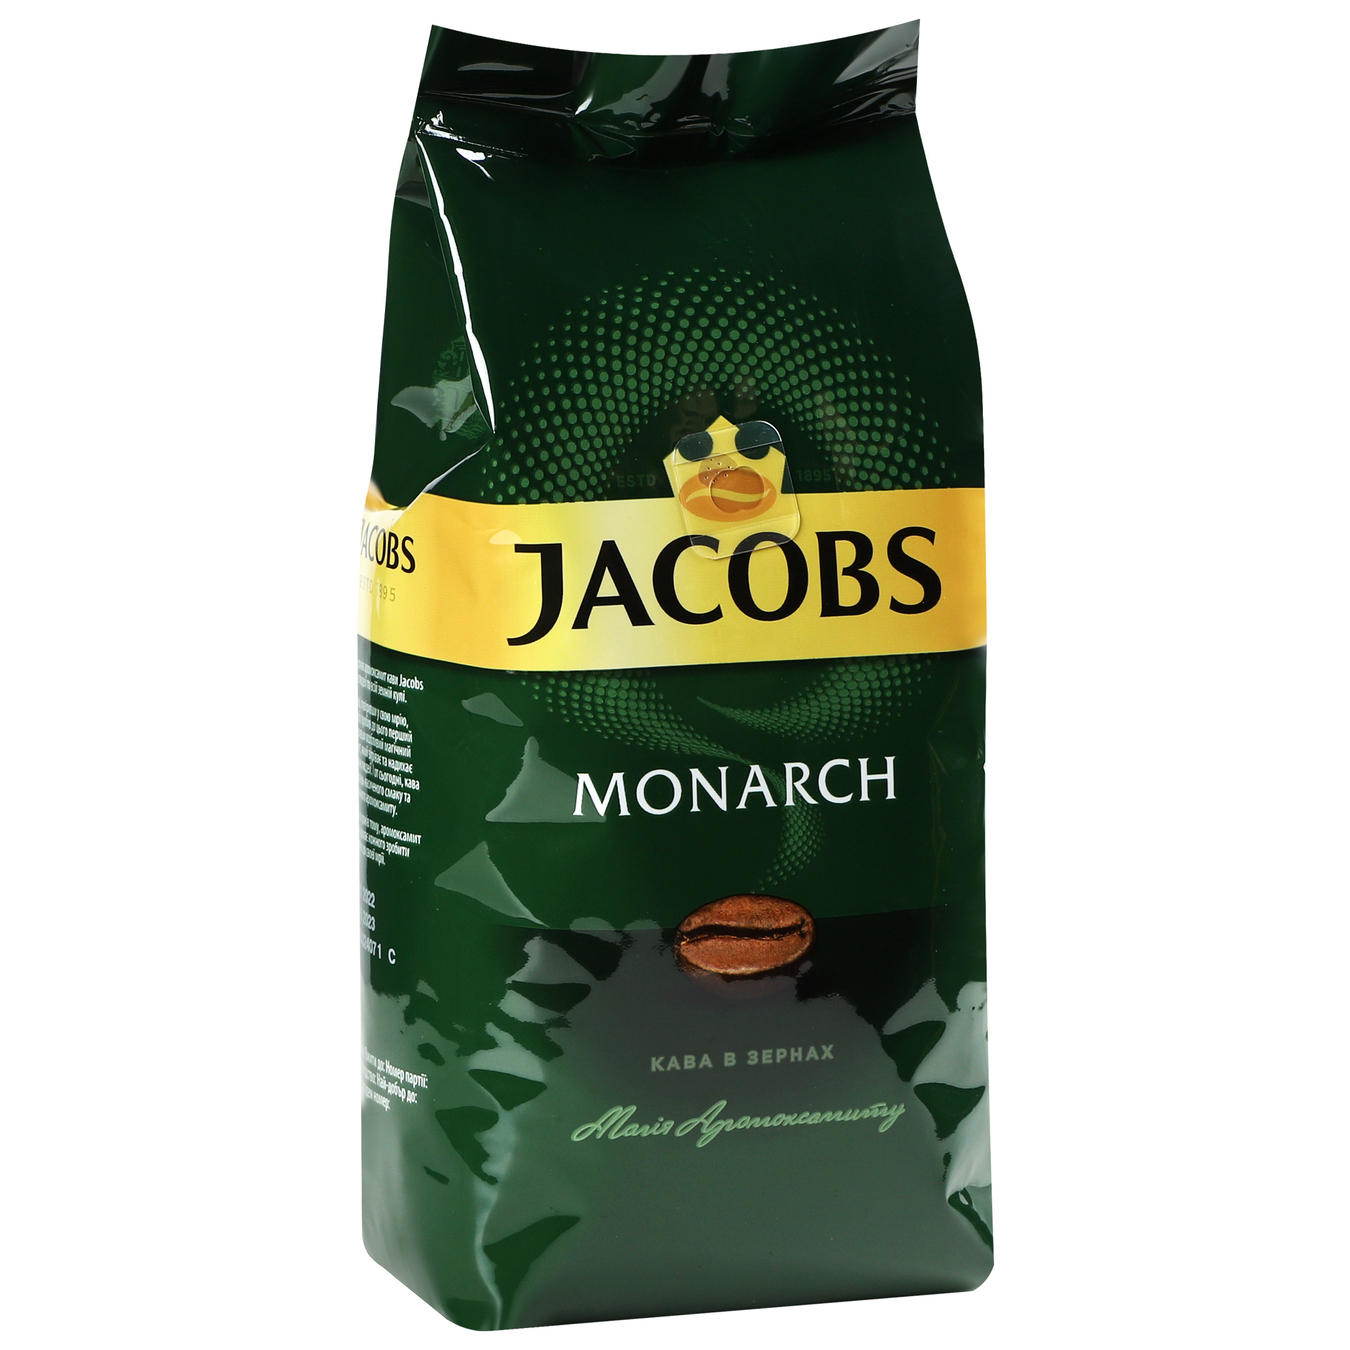 Jacobs Monarch Coffee Beans 250g 2